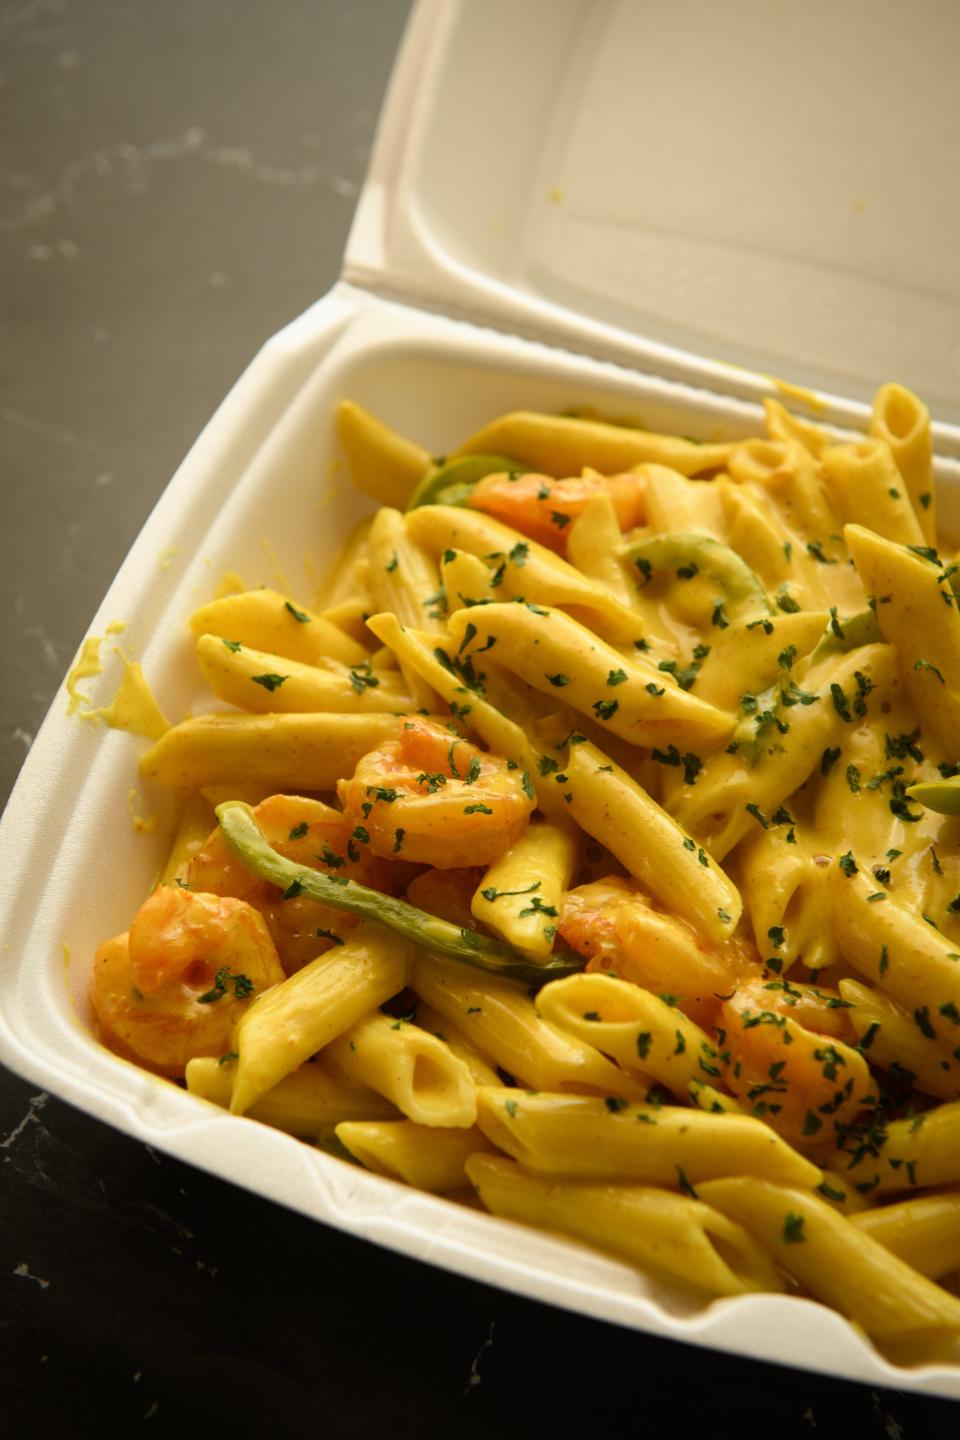 Curry shrimp pasta from A&M Island Cafe in Midway Center on Bragg Boulevard.